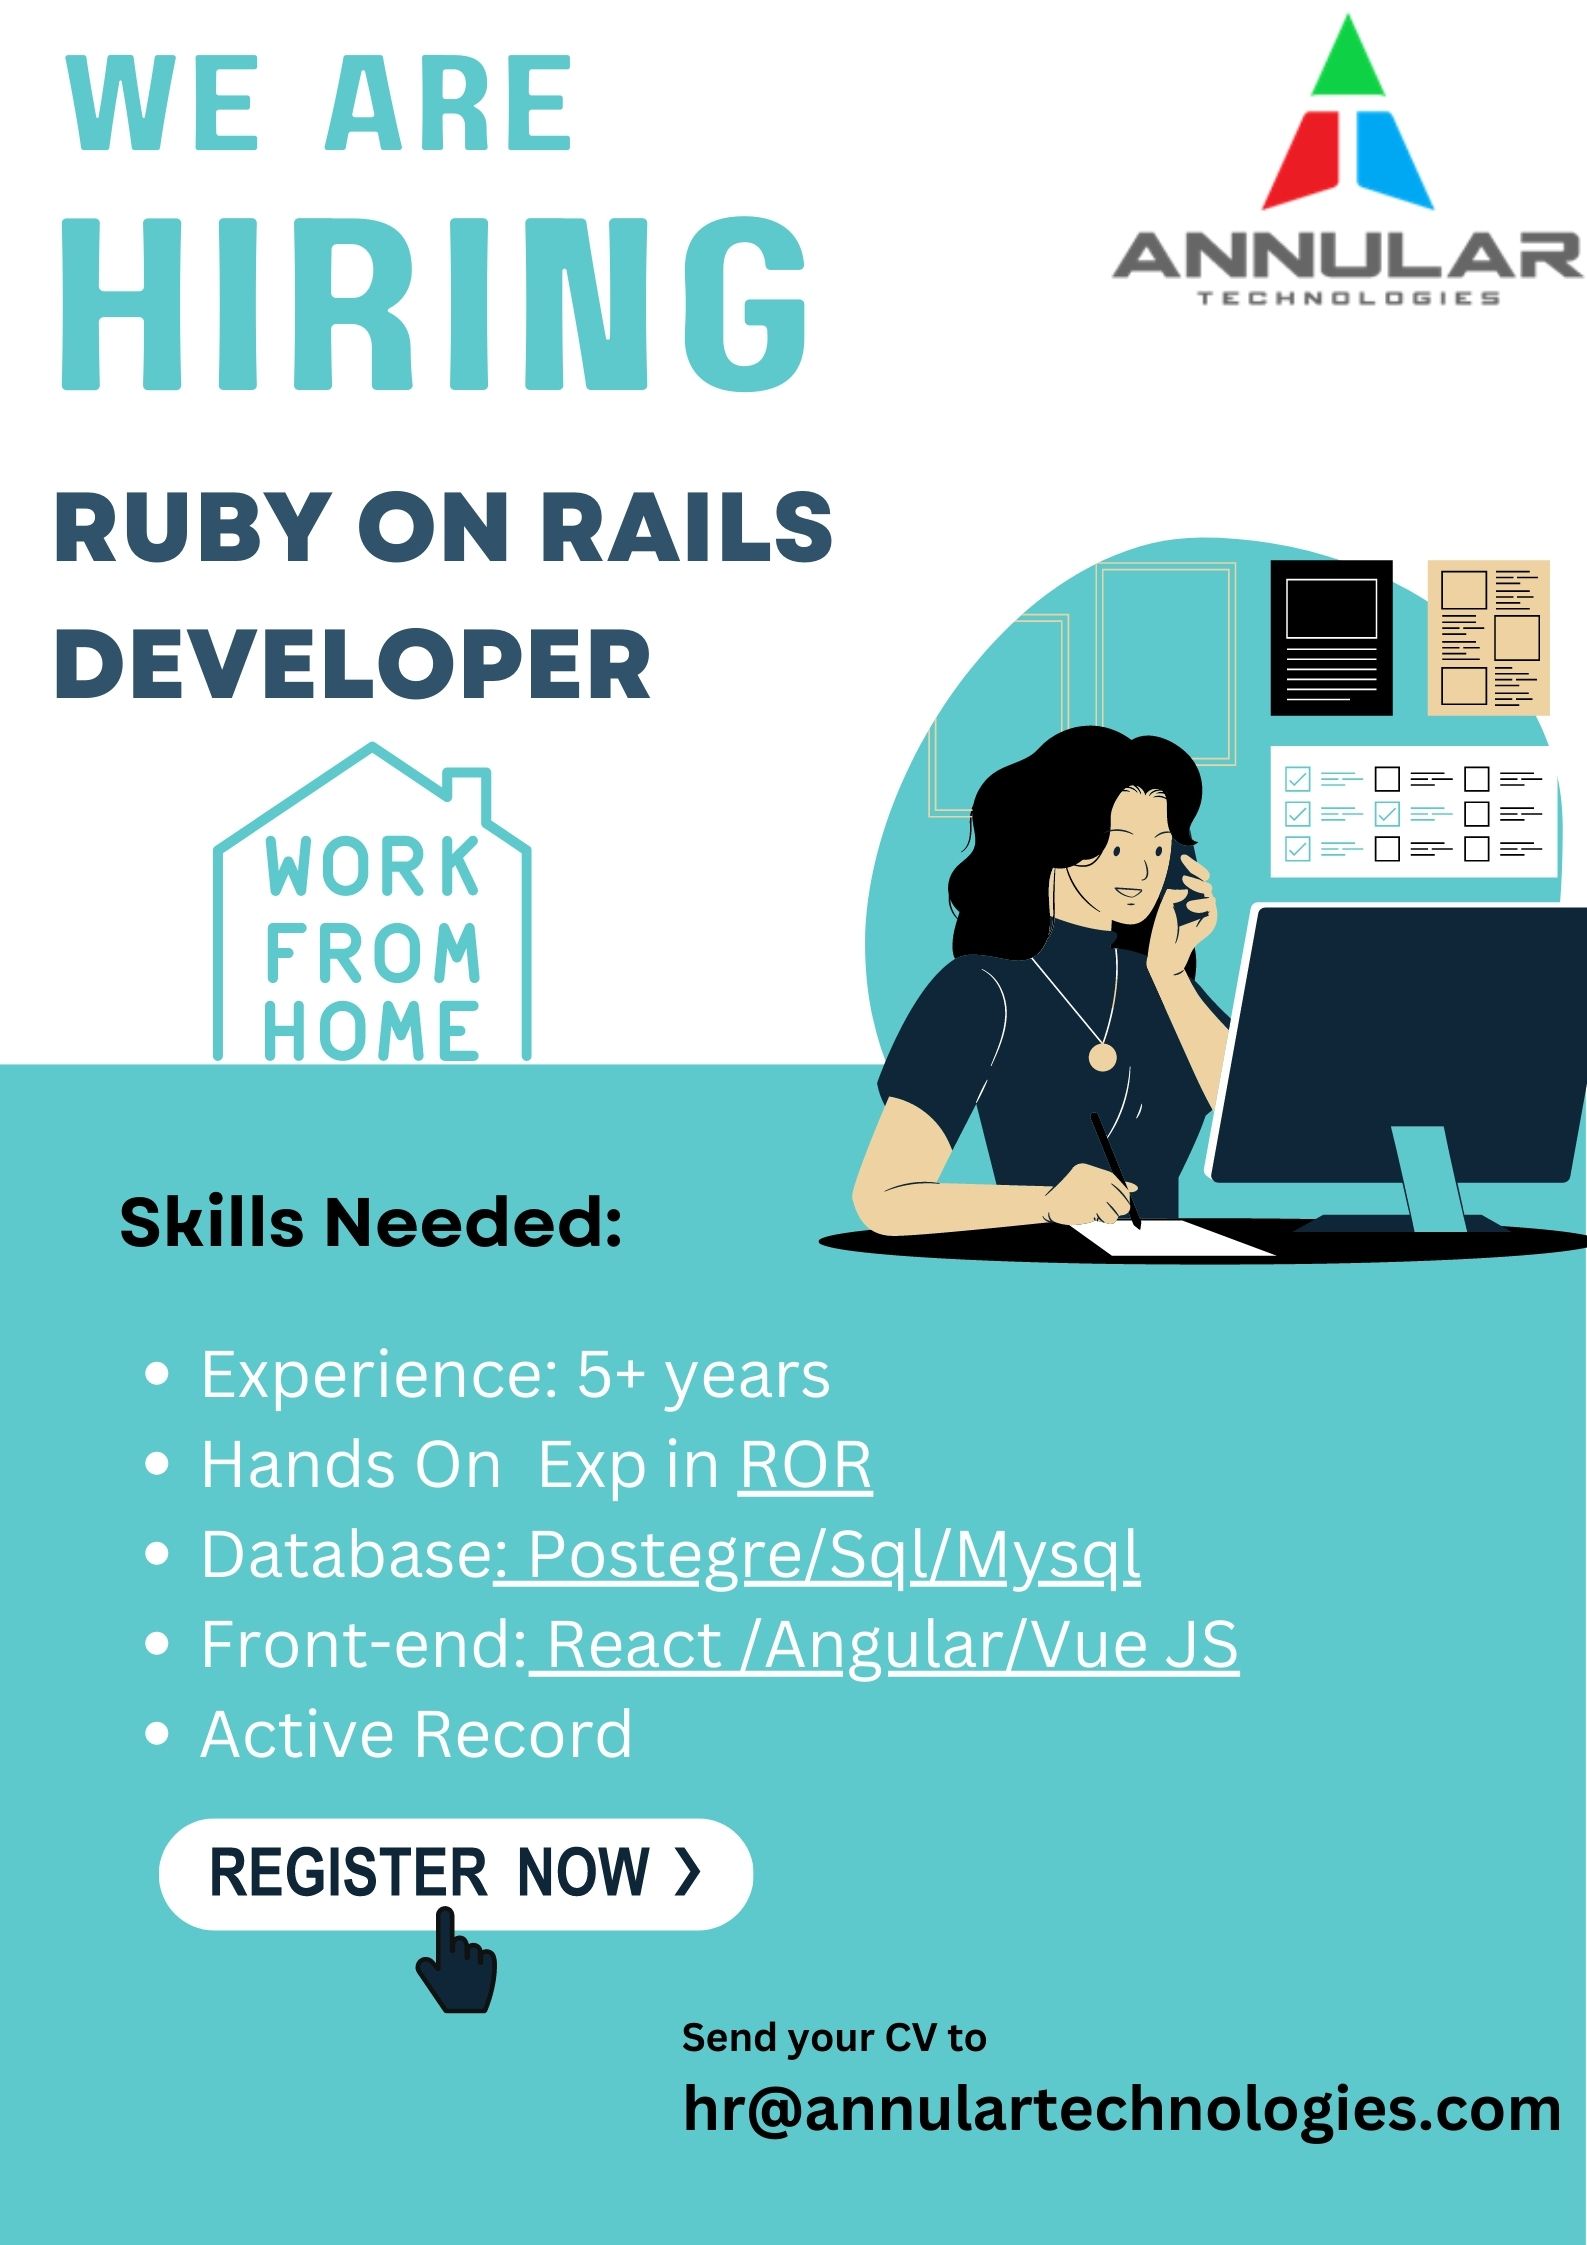 A
WE ARE Fy

HIRING ~*~

RUBY ON RAILS

DEVELOPER

0 mC)

WORK

FROM
HOME

 

LS oL=T a Tg [of HES RAVI T
e Hands On Exp in ROR
e Database: Postegre/Sql/Mysqgl

e Front-end: React /Angular/Vue JS
e Active Record

REGISTER NOW )